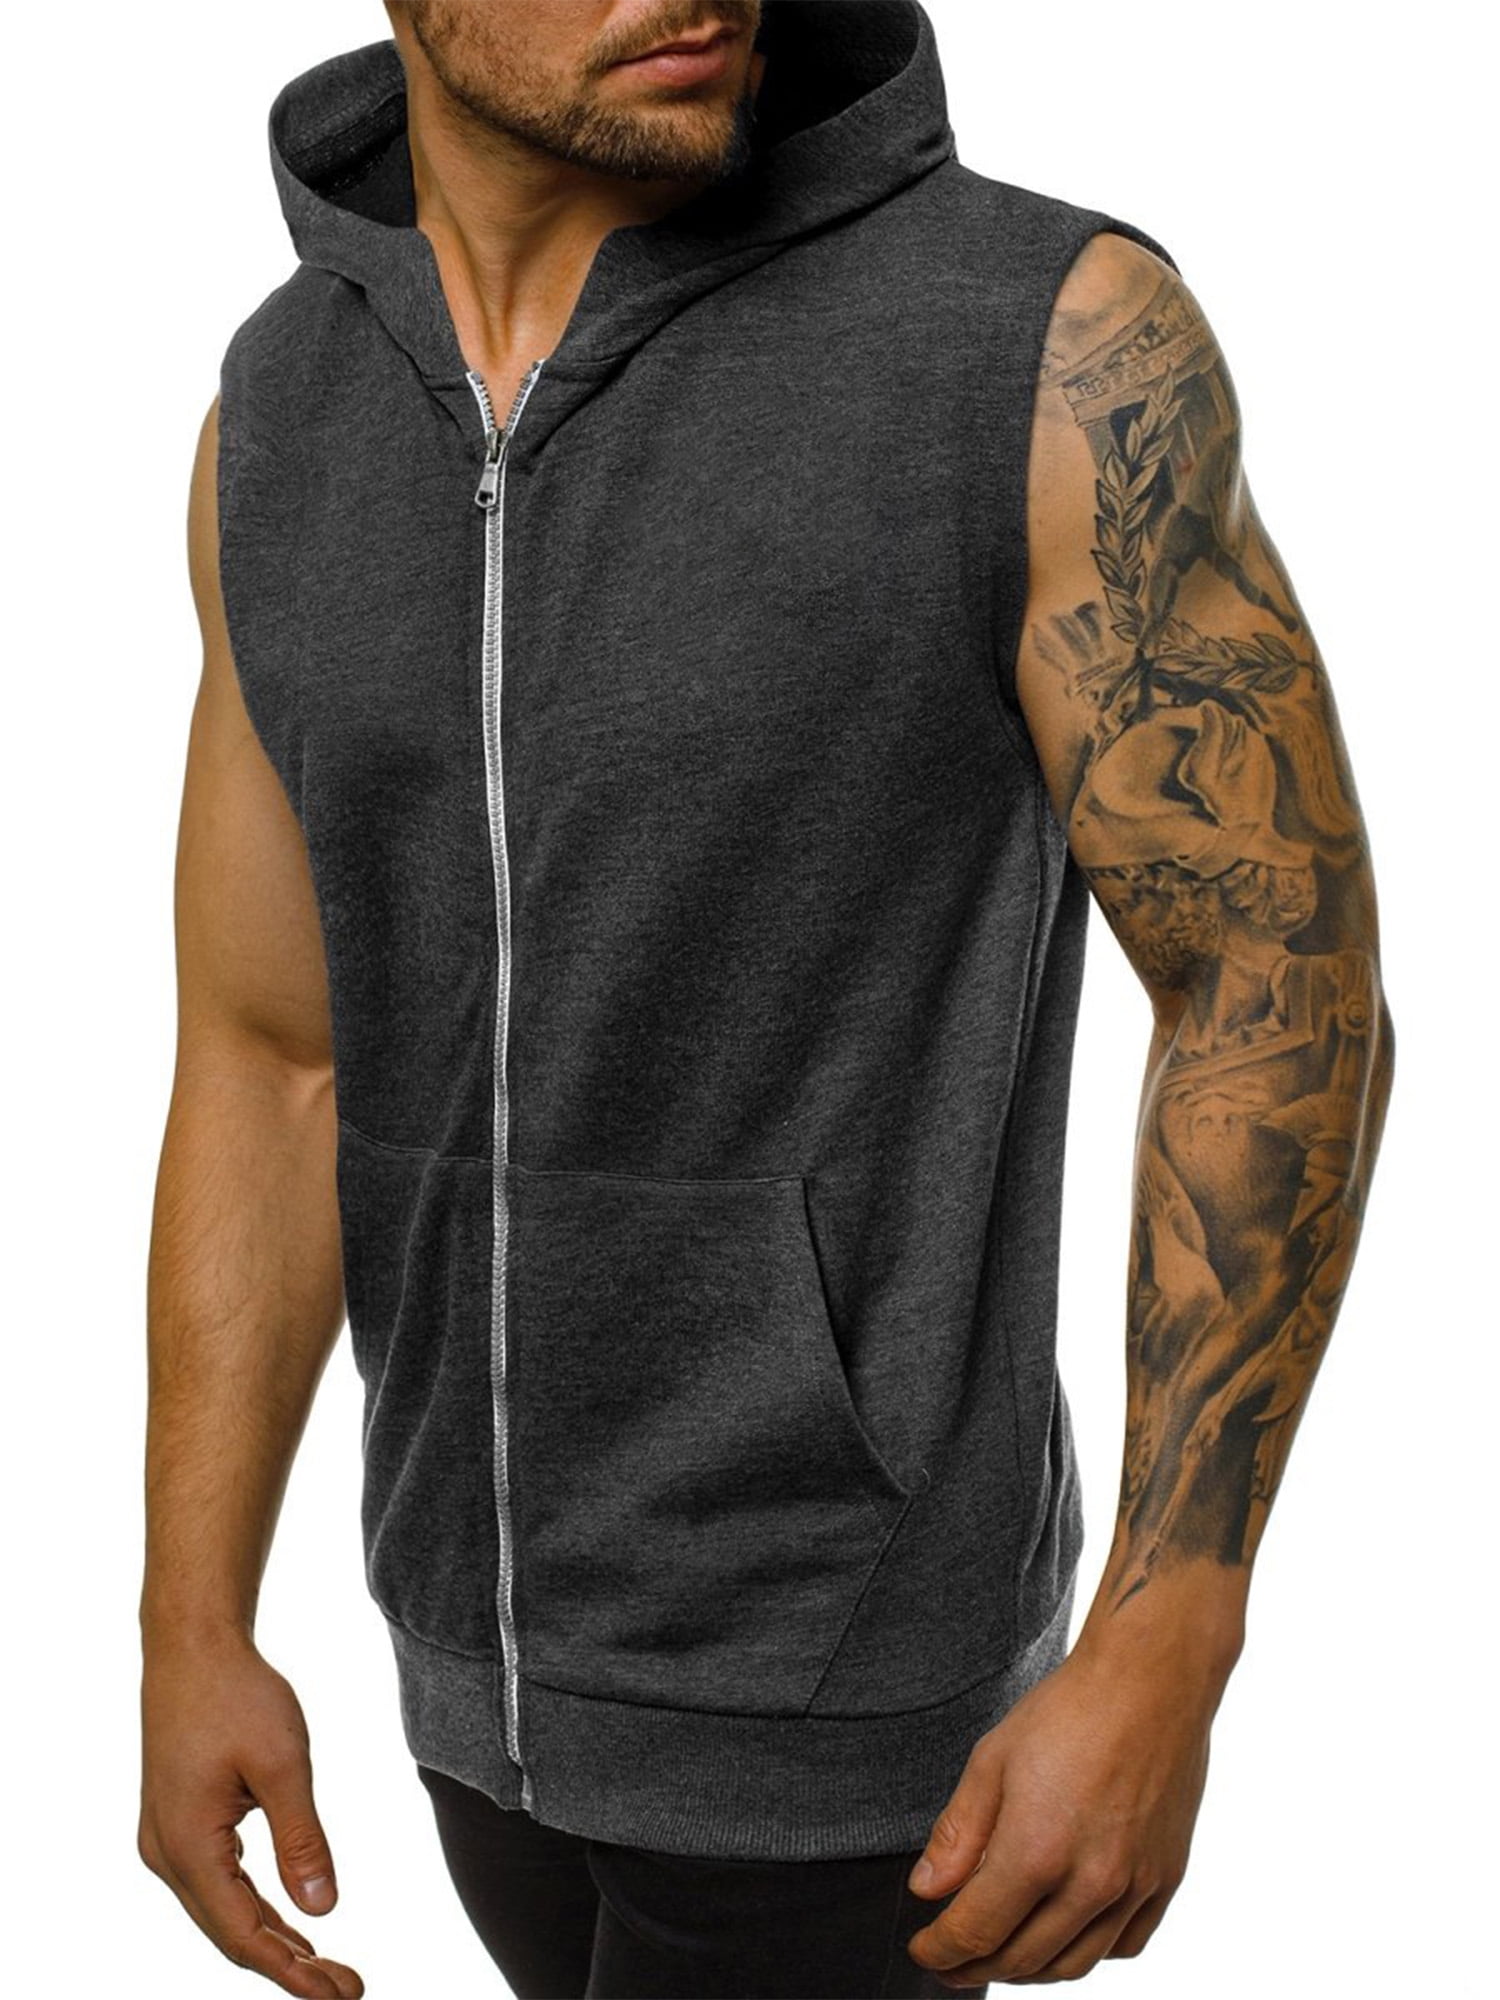 Magiftbox Mens Workout Hooded Tank Tops Sleeveless Gym Hoodies with Kanga Pocket Cool and Muscle Cut 